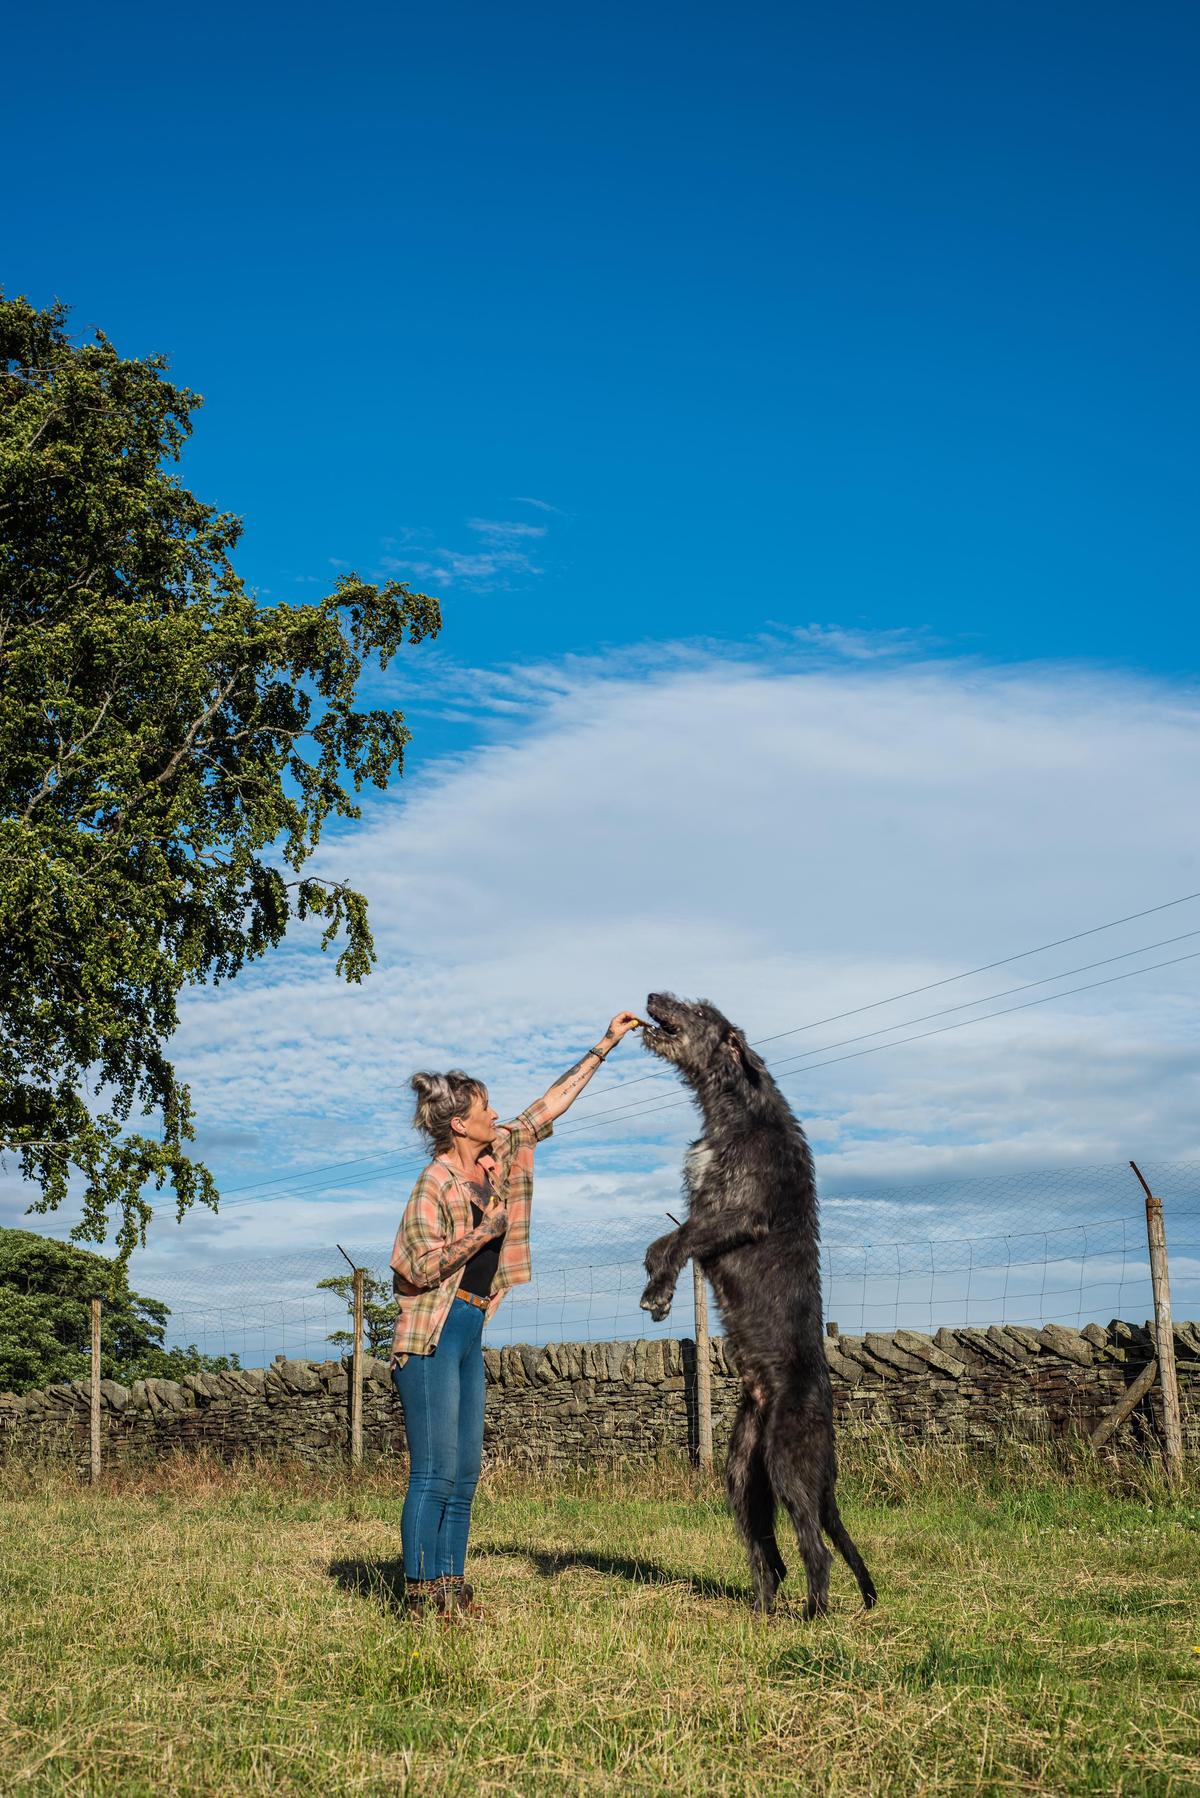 Claire with Wilson, the tallest wolfhound. (Courtesy of <a href="https://www.instagram.com/austonley_irish_wolfhounds/">Austonley Irish Wolfhounds</a>)